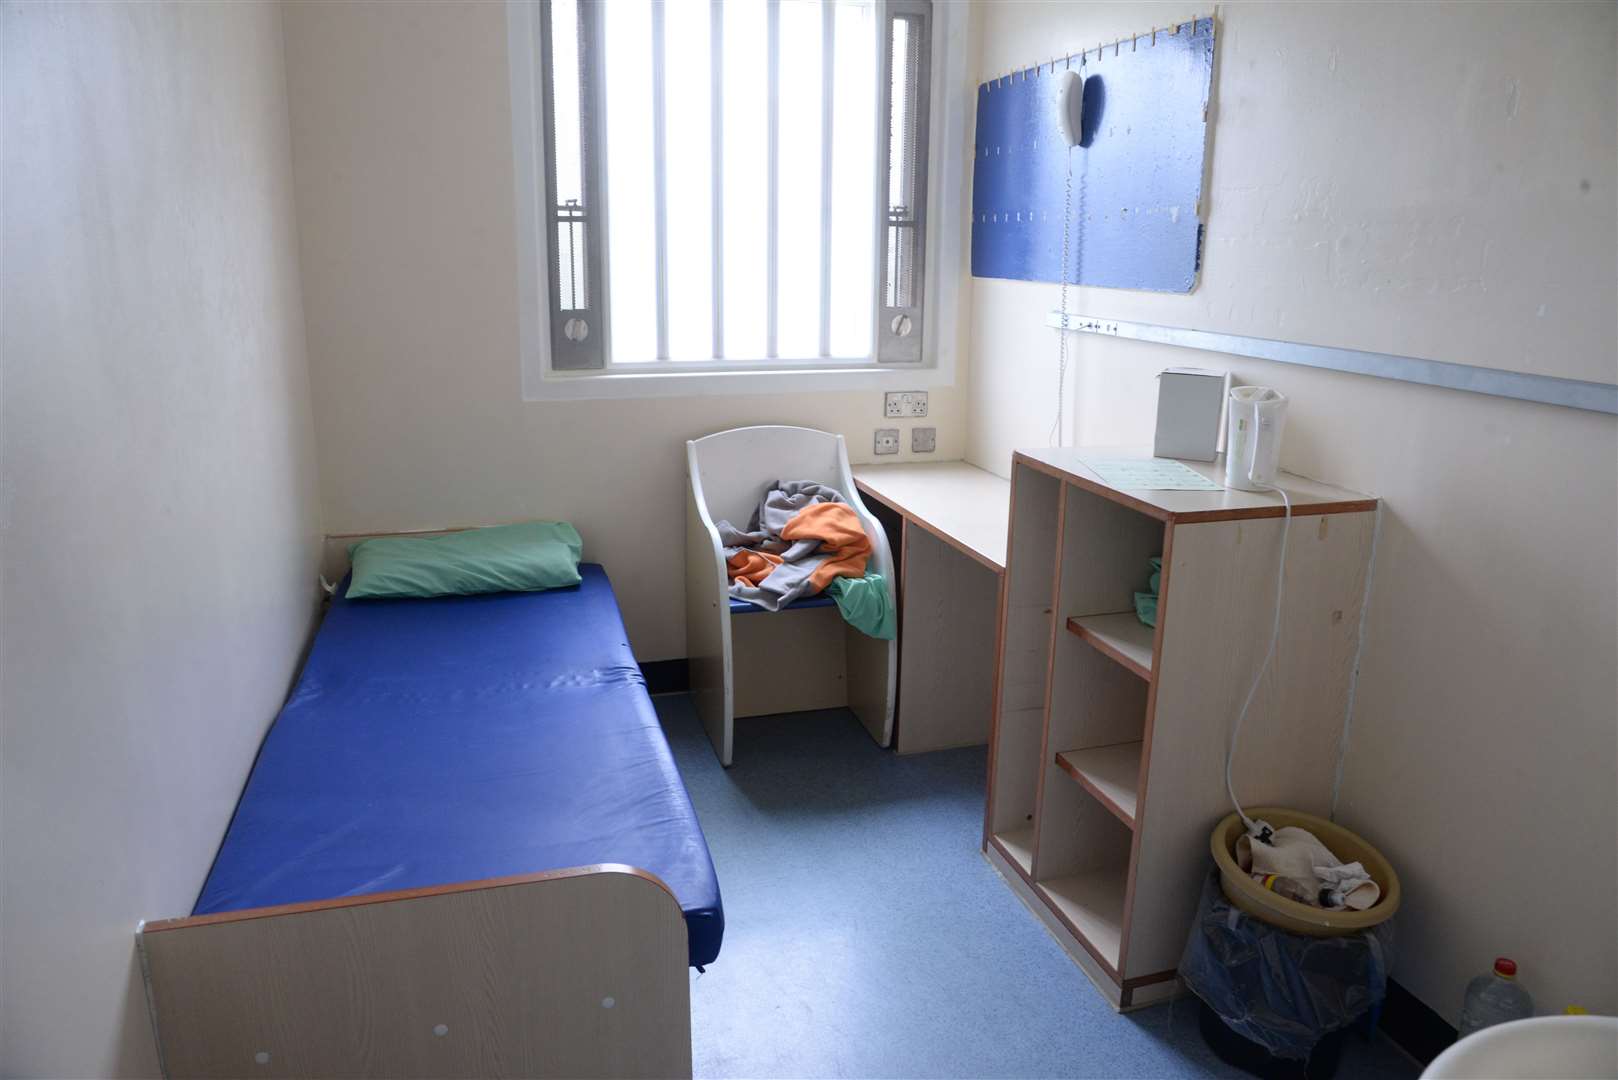 A cell at HMP Swaleside. Picture: Chris Davey. (8021186)